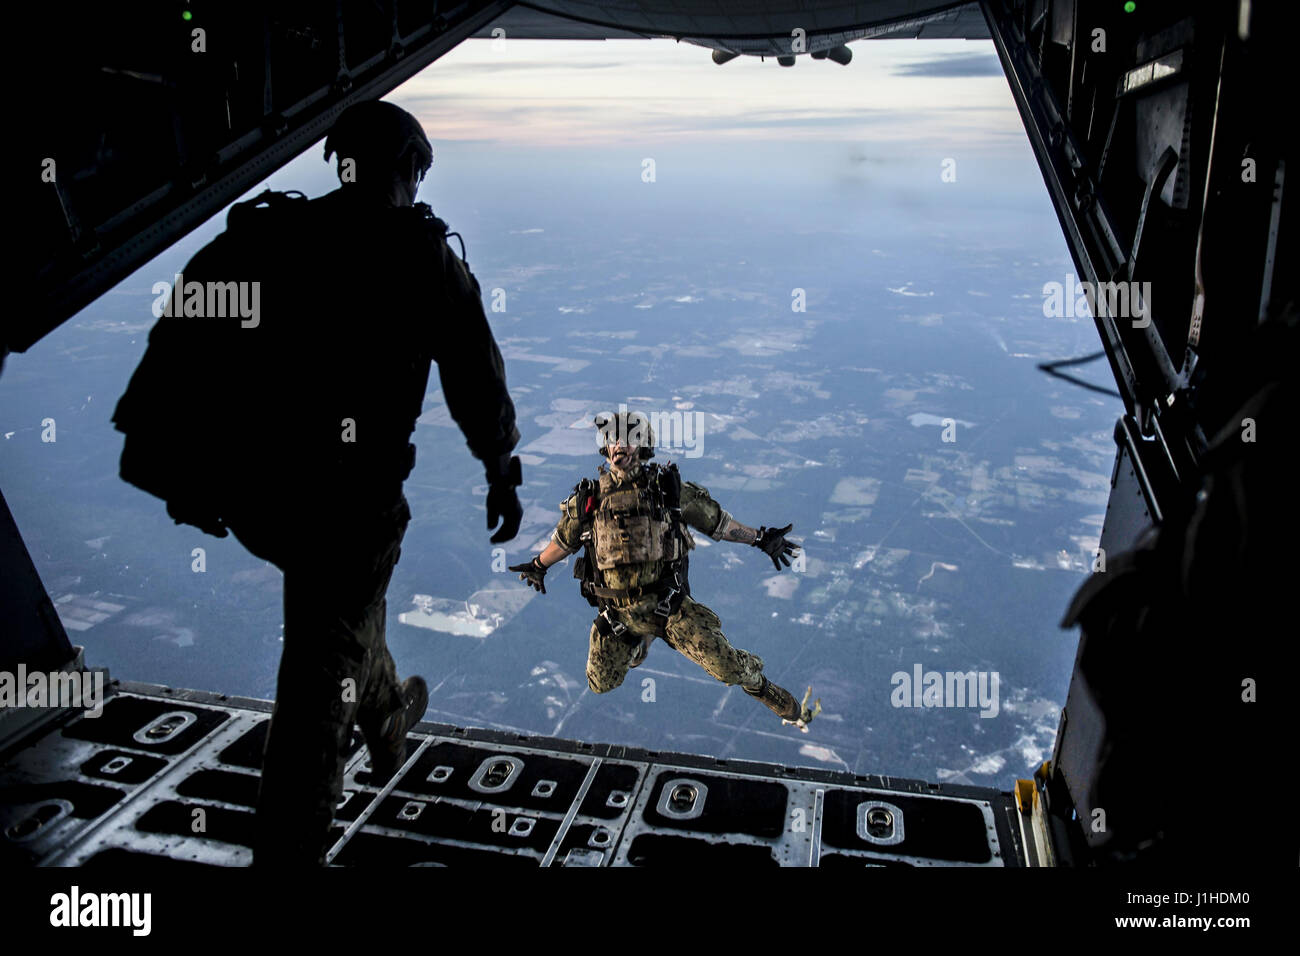 A Naval Warfare service member leaps from an Air Force MC-130 Combat Talon II during a high-altitude, low-opening jump Stock Photo